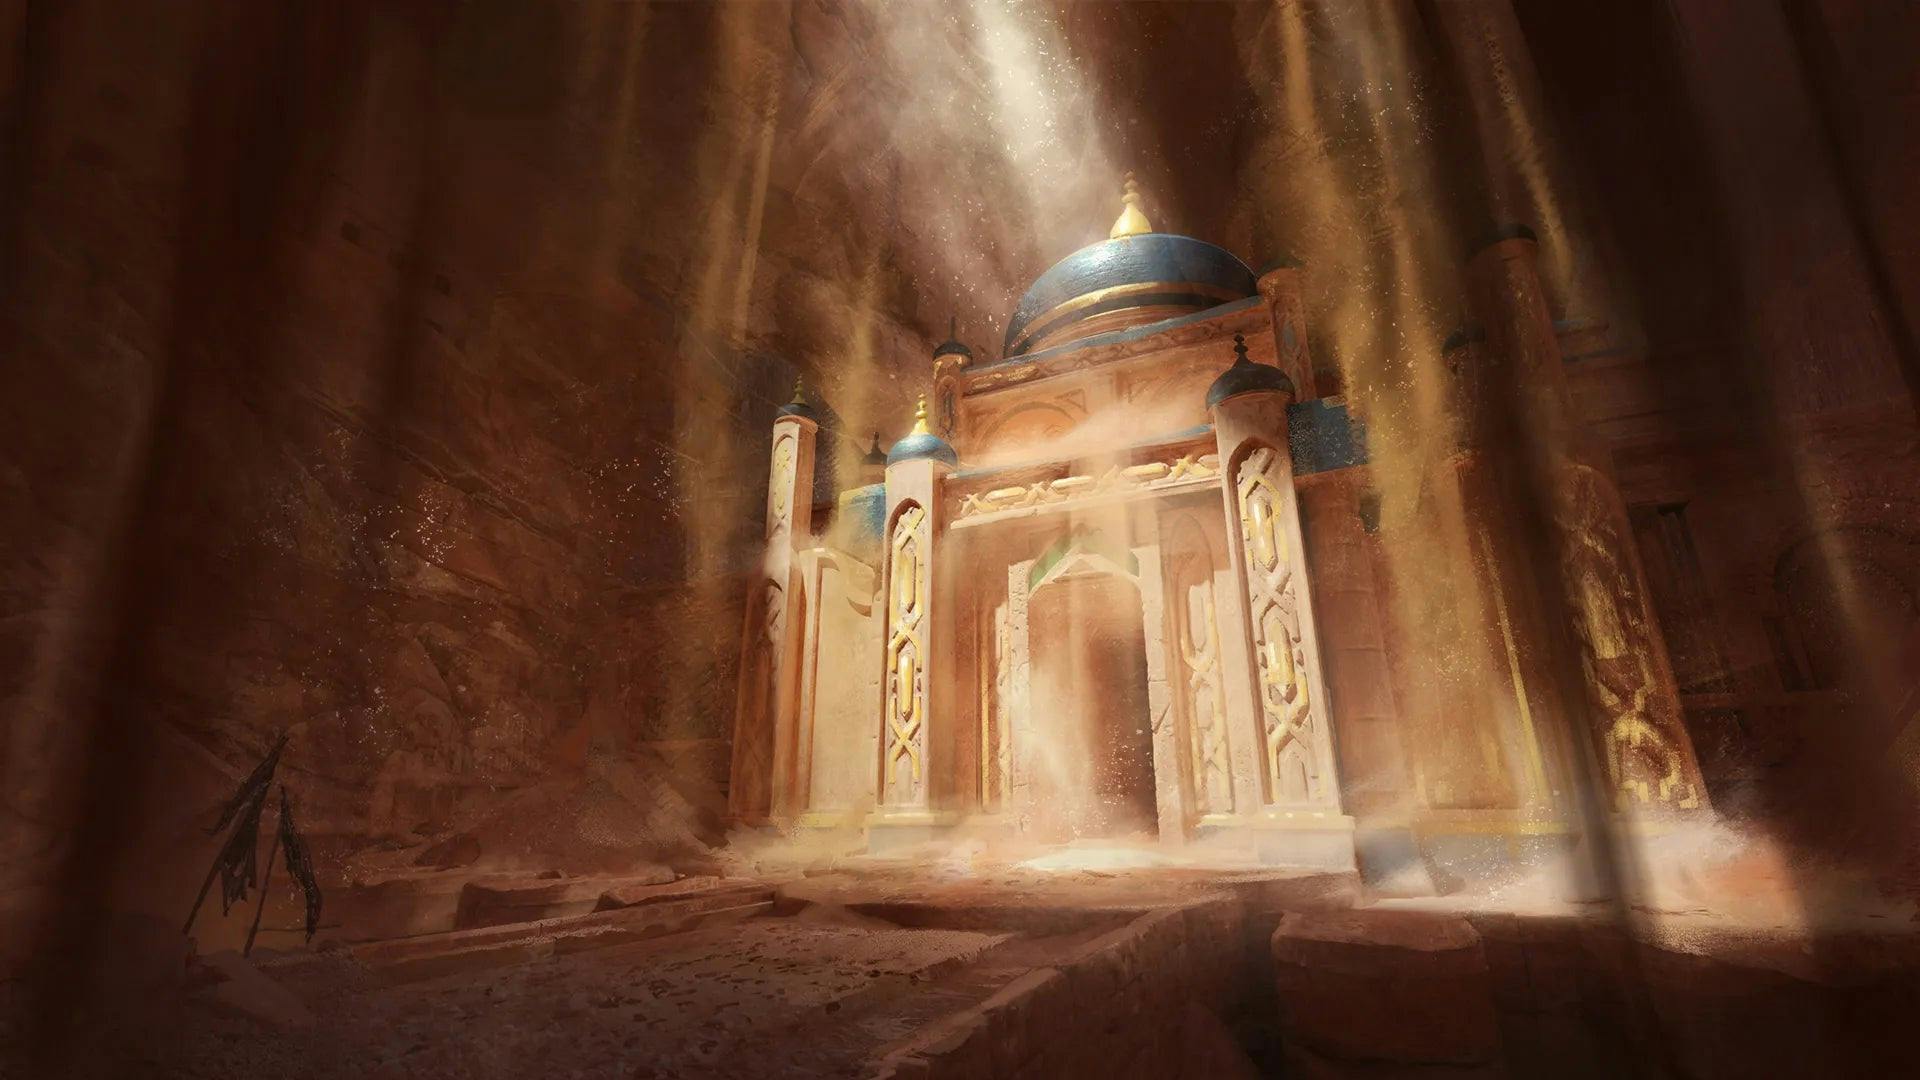 Tomb of Sand Scene - 771715a15207567d44874a6859828865